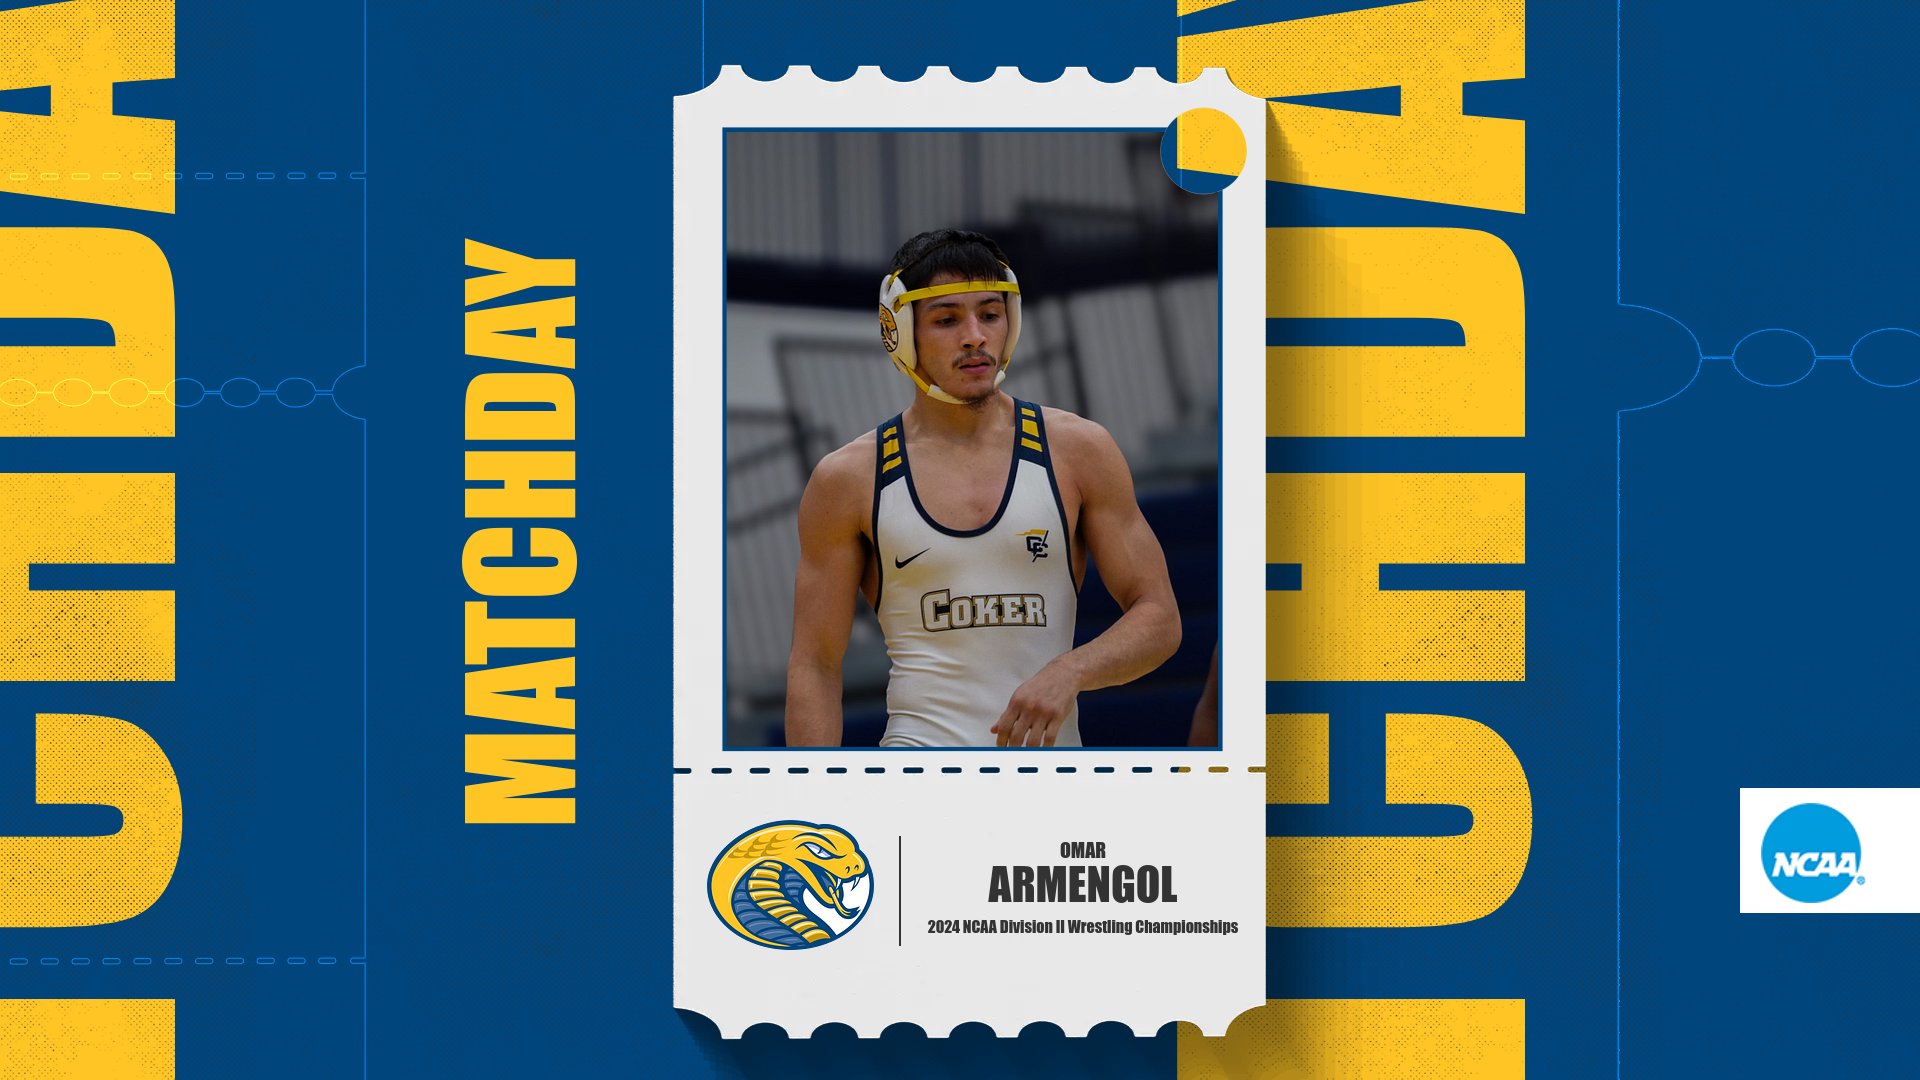 Armengol Competes in NCAA Division II Wrestling Championship